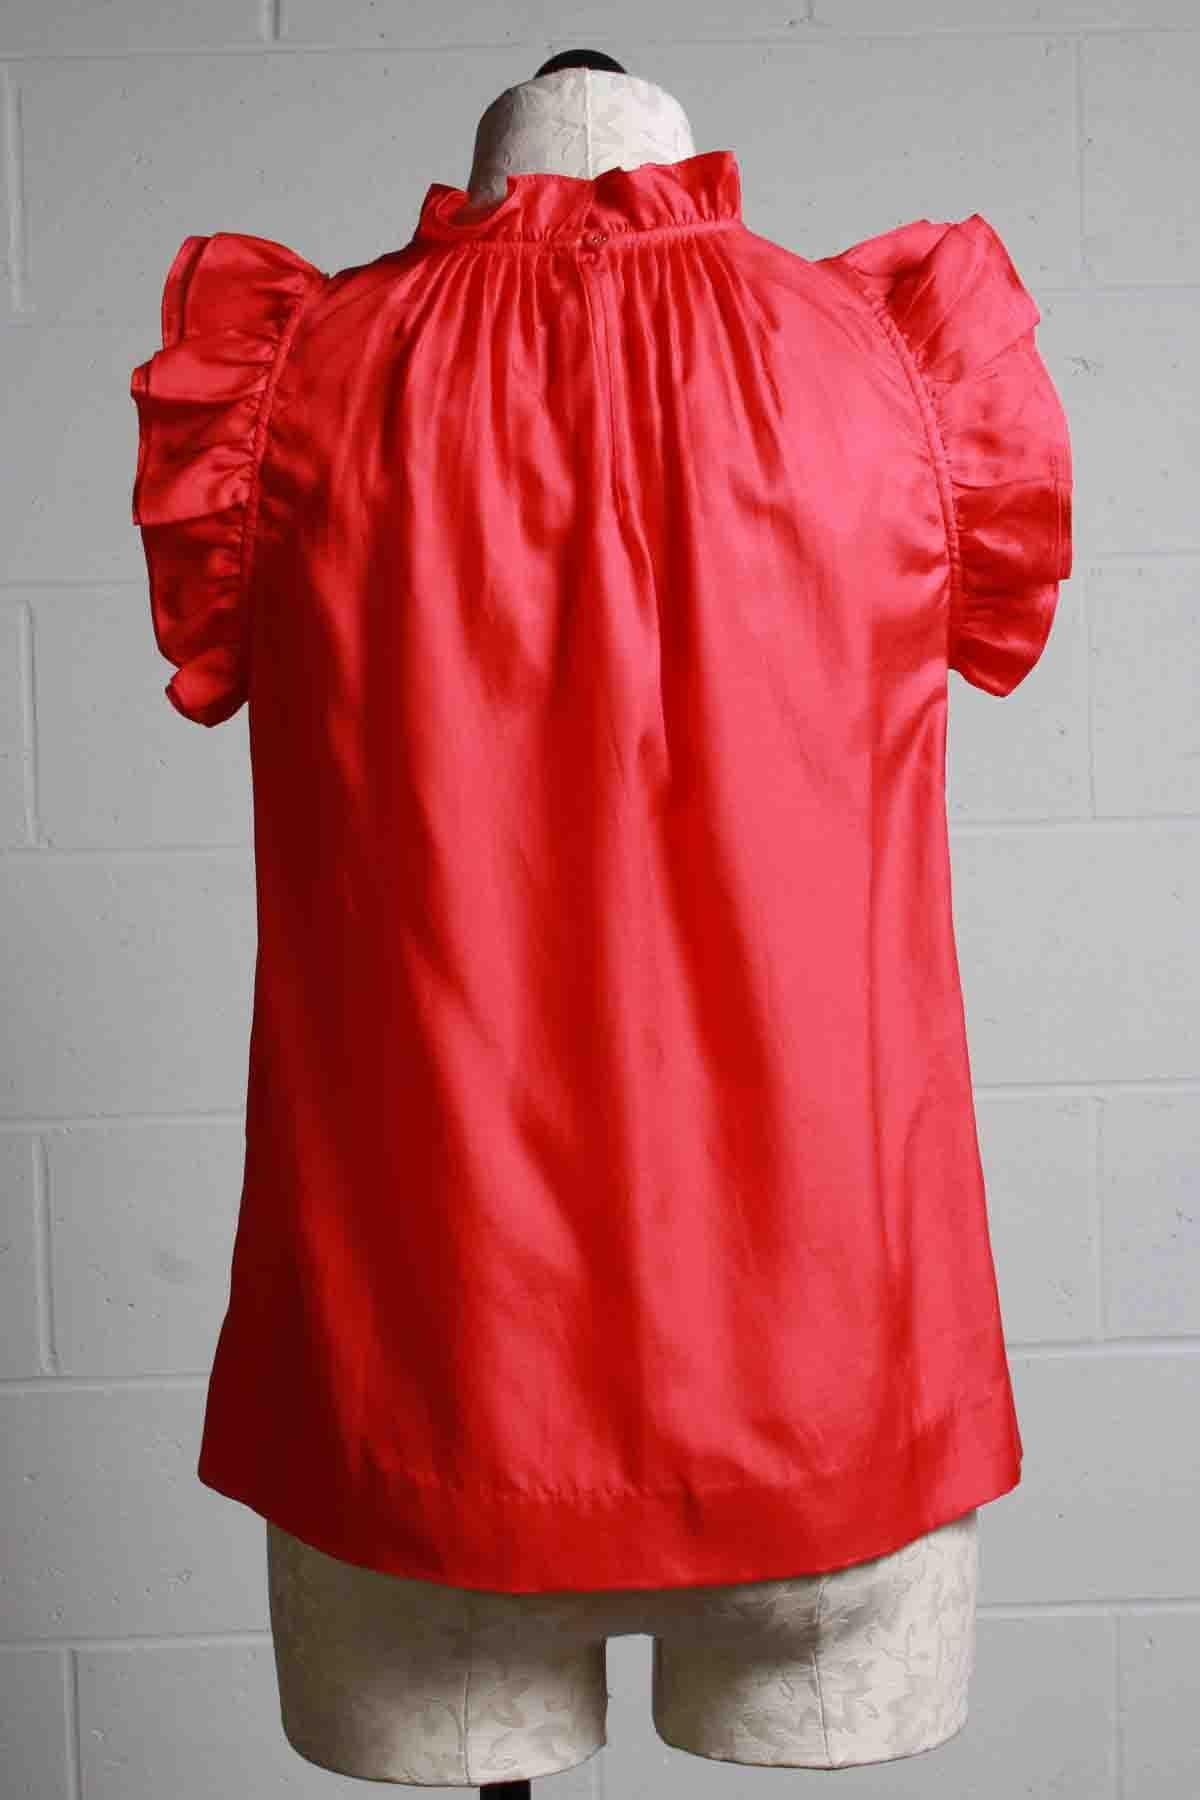 back view of Fiesta red sleeveless Emma Top by Marie Oliver with Ruffled sleeves and neck